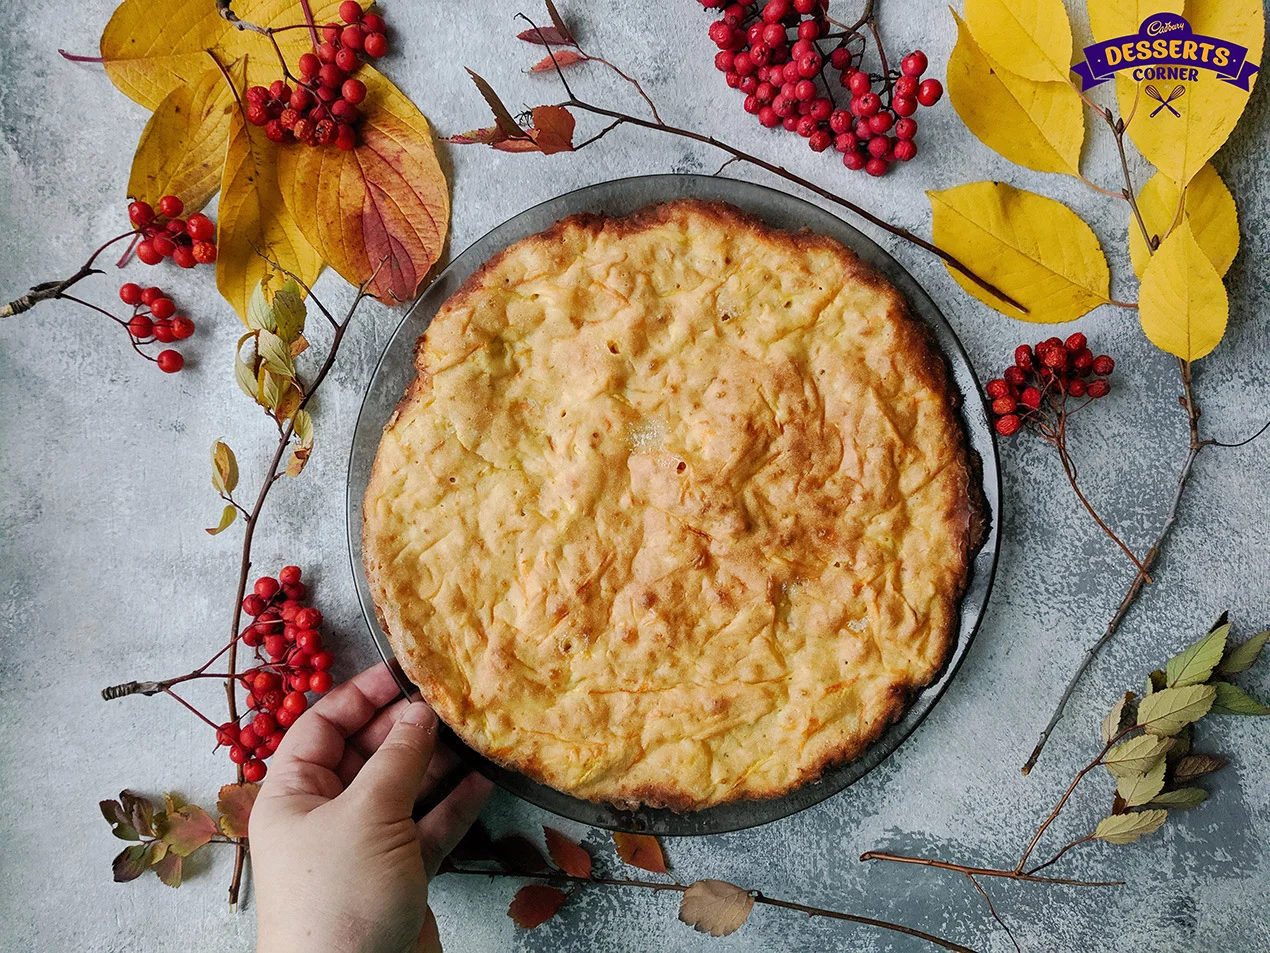 Here Are Our Favorite Autumn Pie Staples to Warm the Soul And Lift Your Spirit